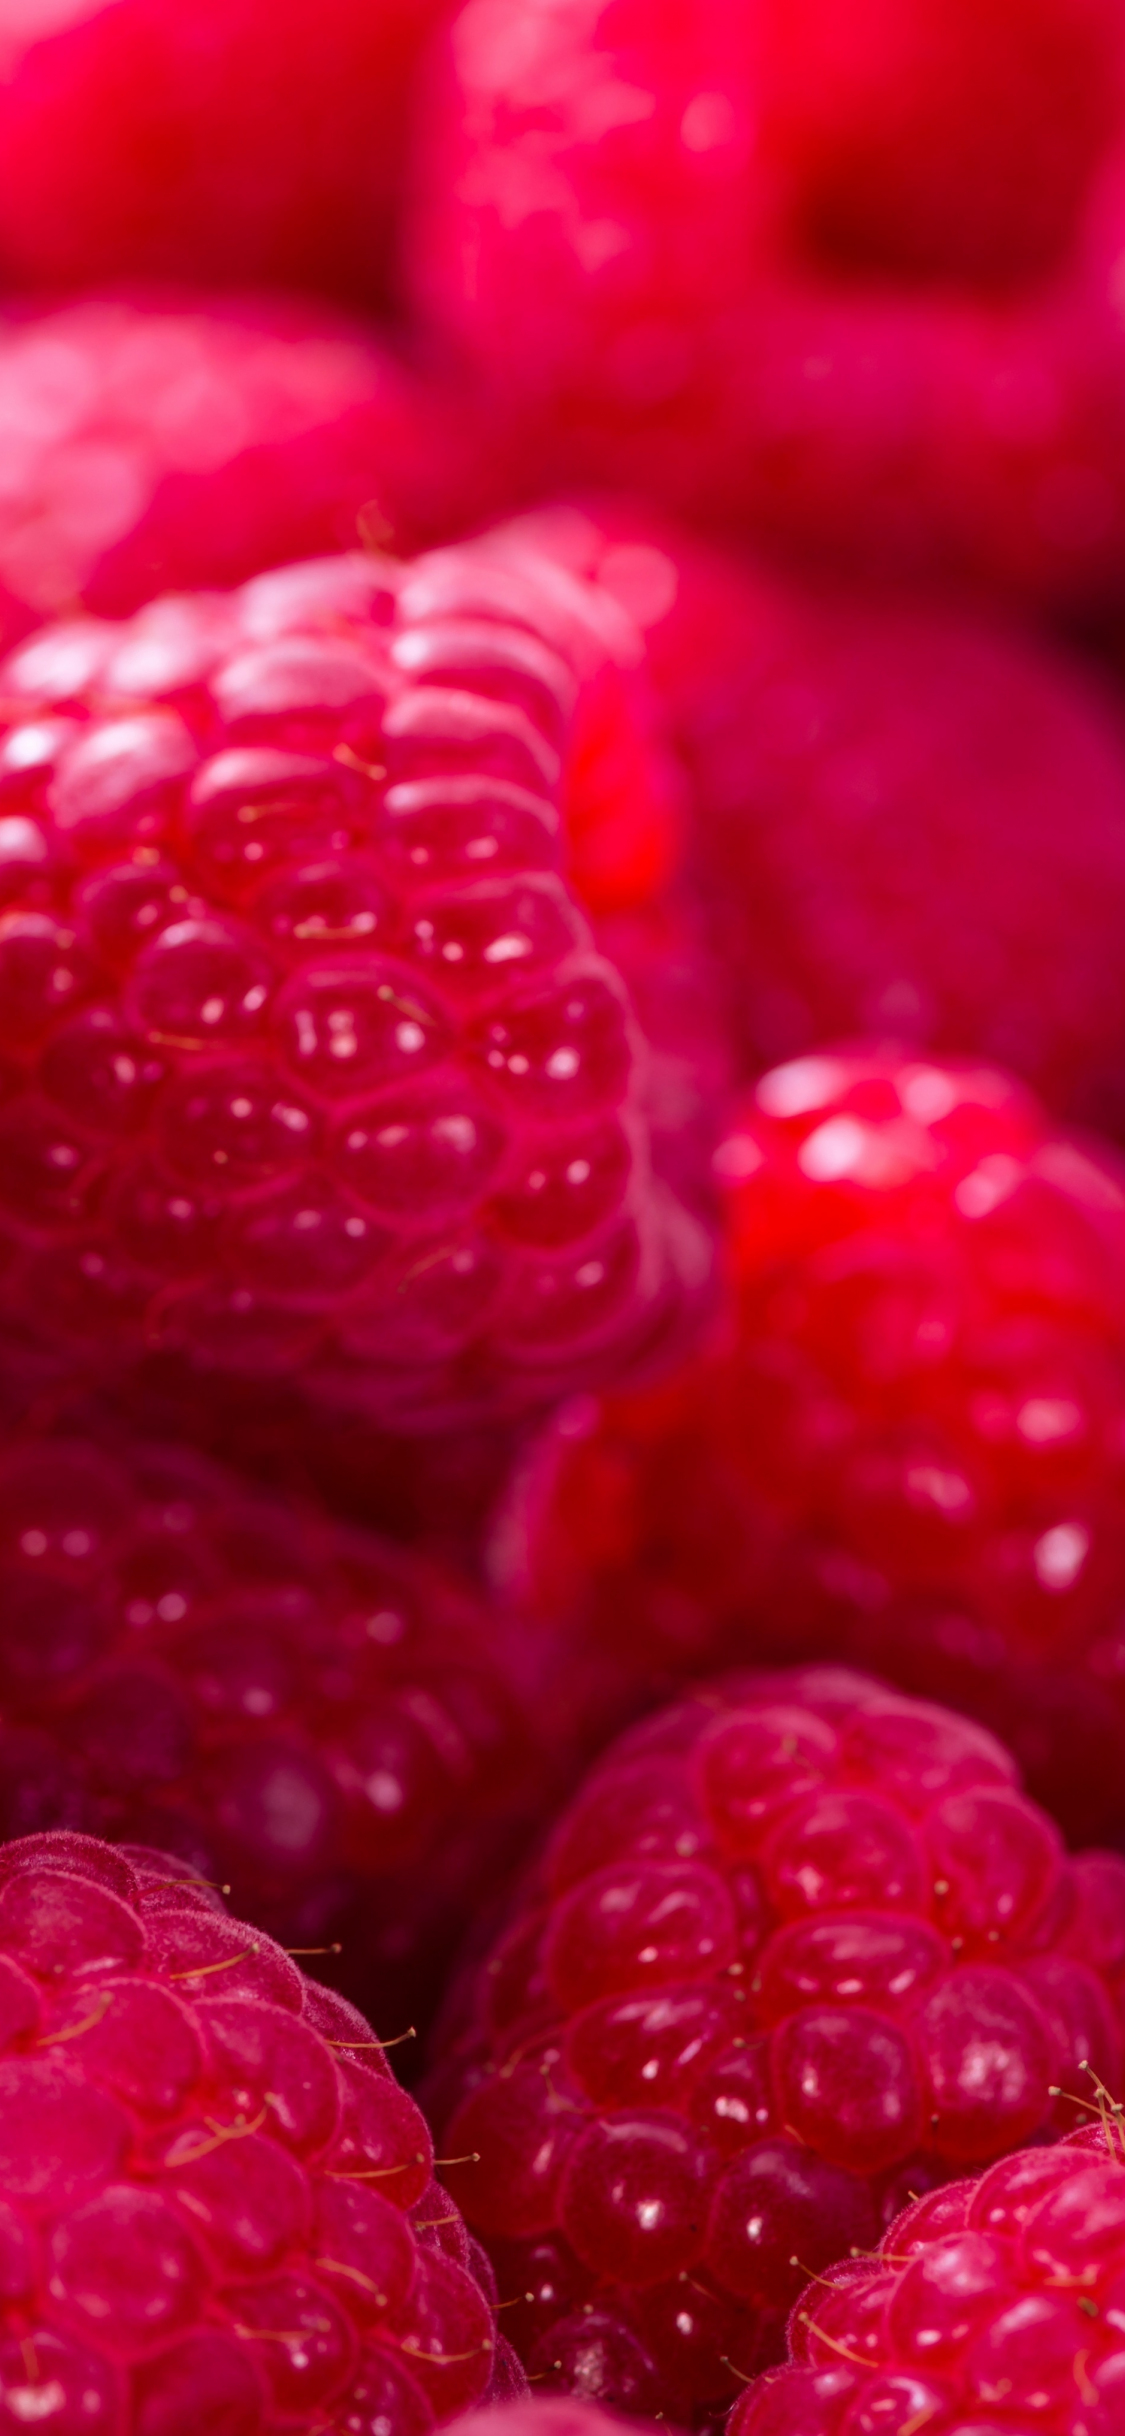 Photo Of Raspberries And Blackberry On Pink Background  Free Stock Photo